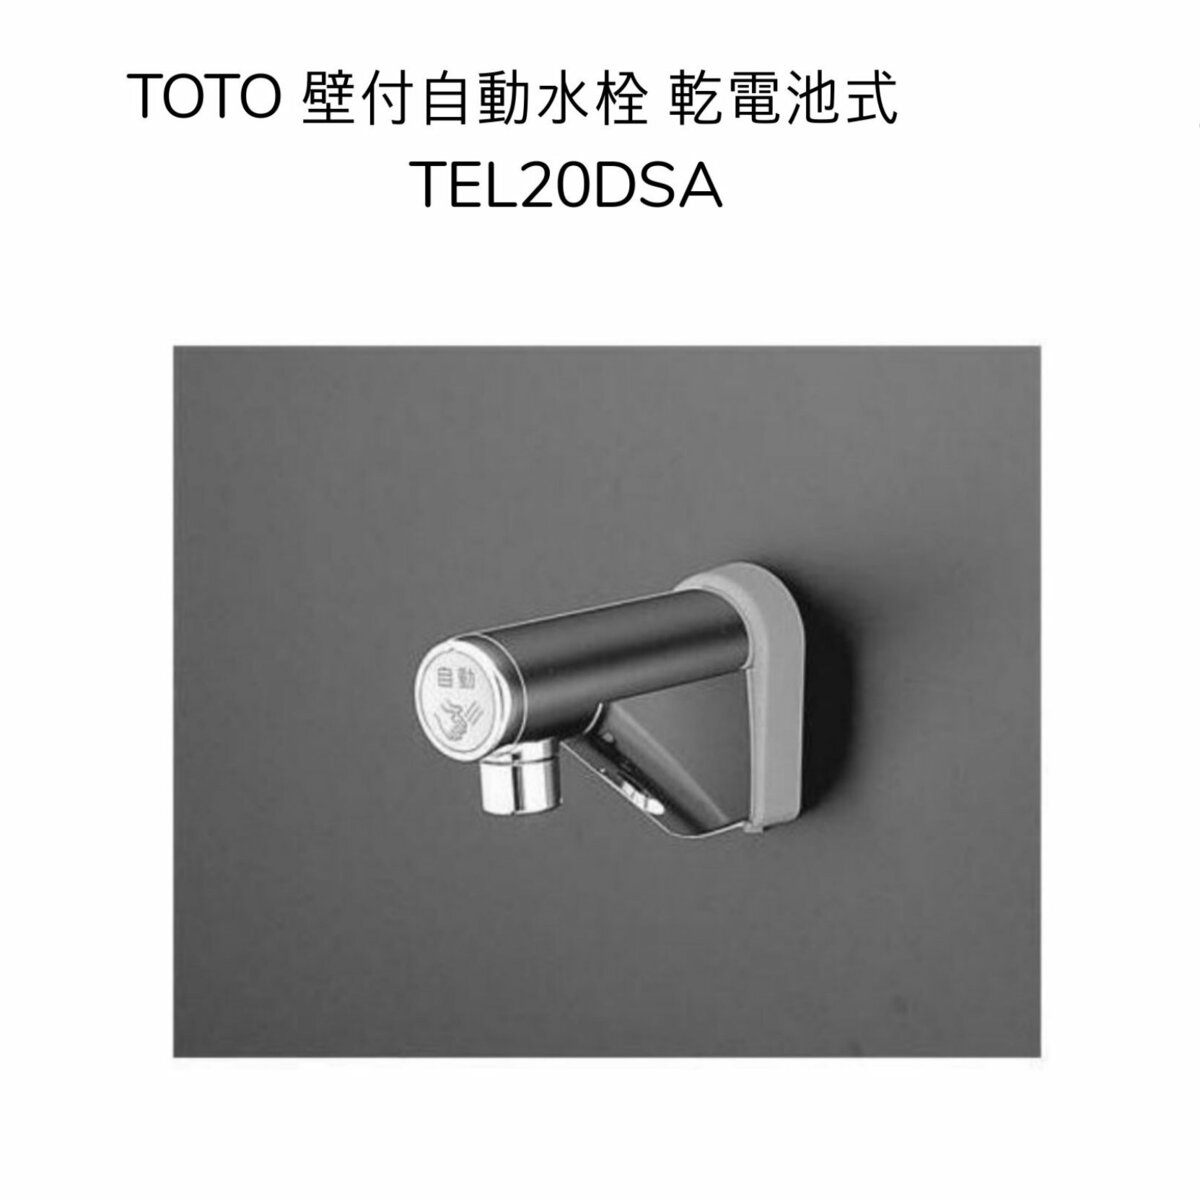 TOTO TLHG30EGR 台付シングル混合水栓 スパウト長さ120mm 混合水栓 取付穴径φ28 取り替え用水栓 2つ穴 洗面水栓 エコシングル  取付ピッチ102mm ゴム栓付き